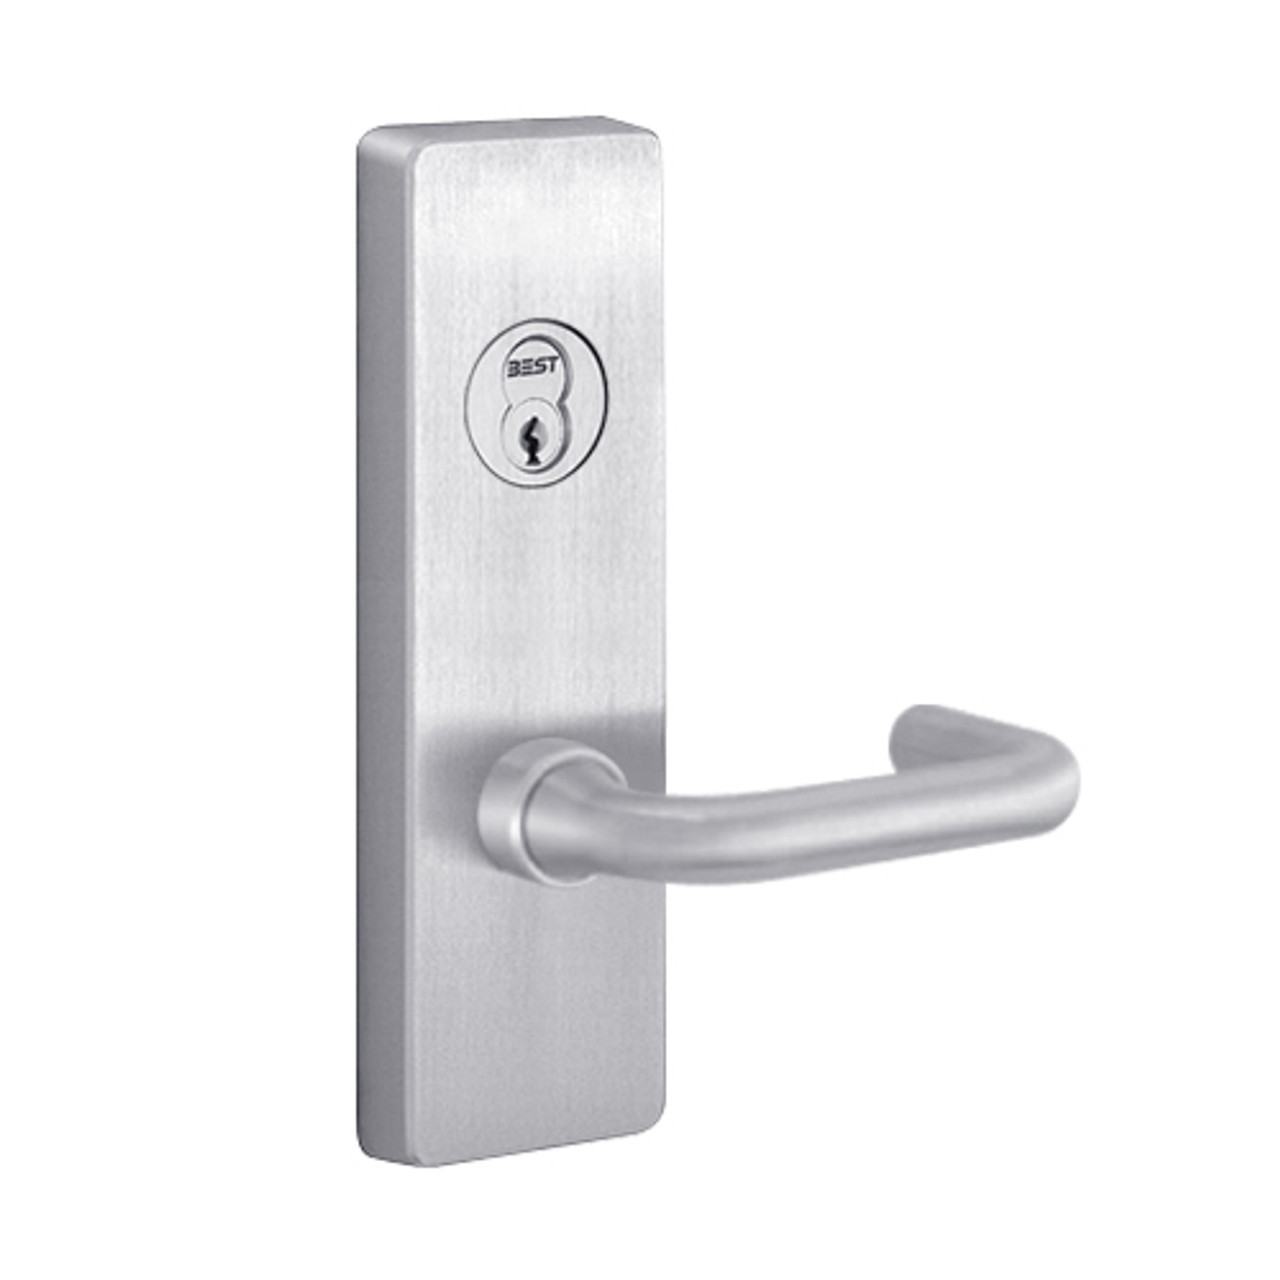 RM4903C-625-RHR PHI Key Retracts Latchbolt Retrofit Trim with C Lever Design for Apex and Olympian Series Exit Device in Bright Chrome Finish